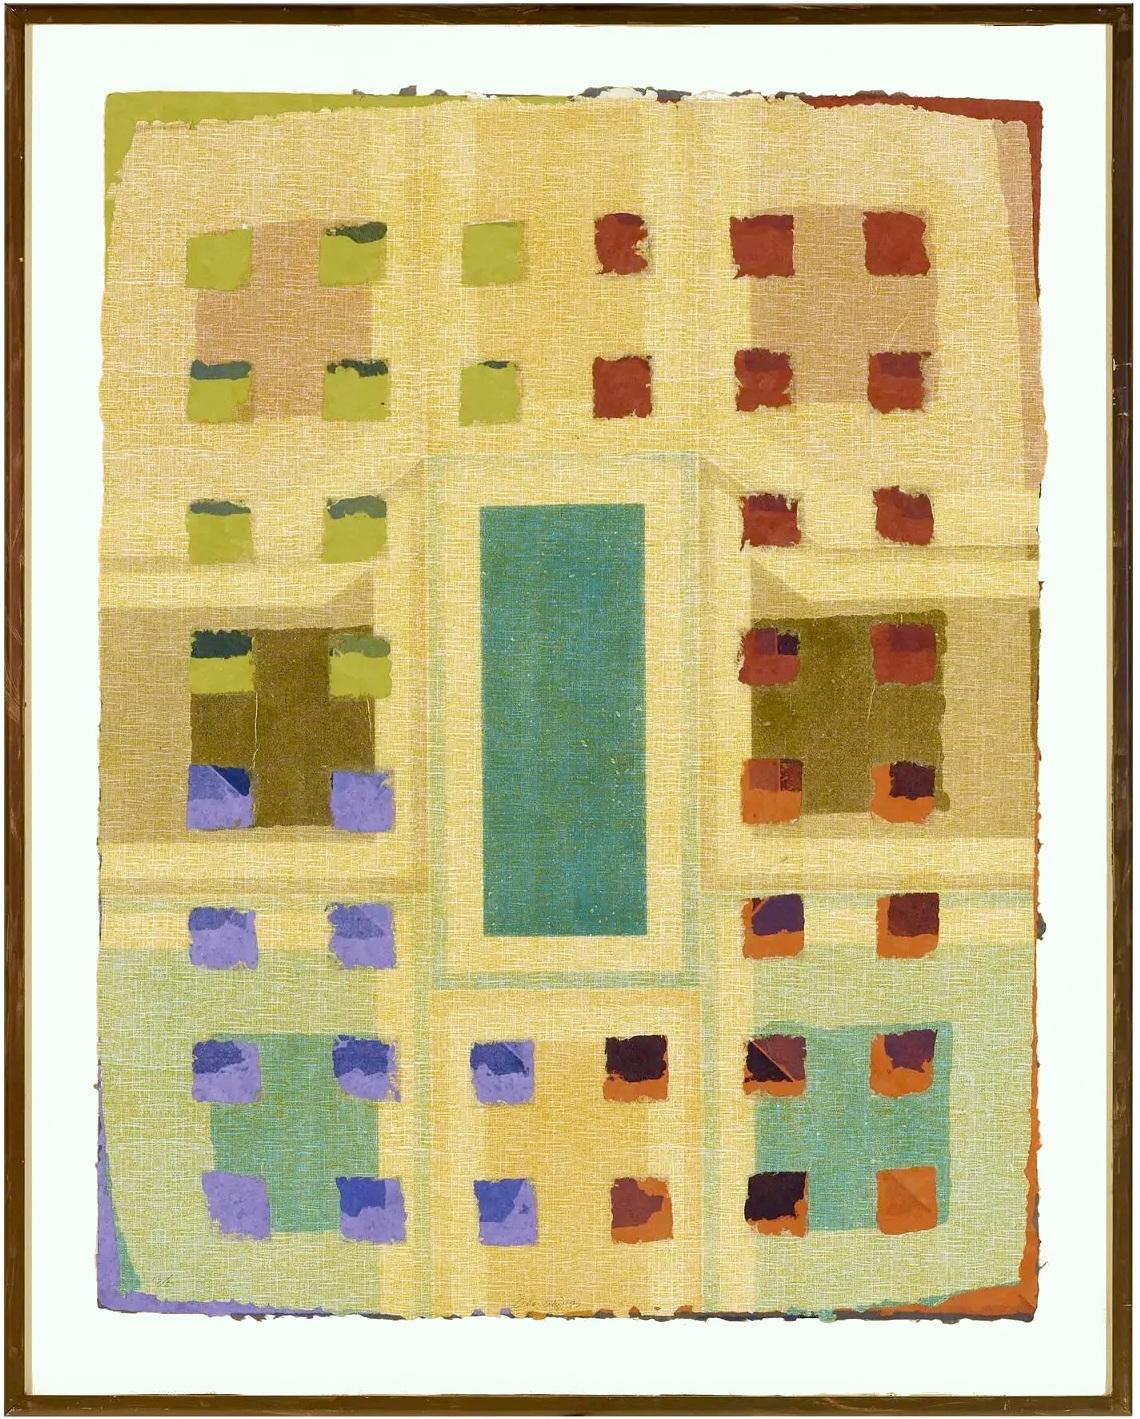 Alan Shields Abstract Print - Untitled mixed media geometric abstraction collage